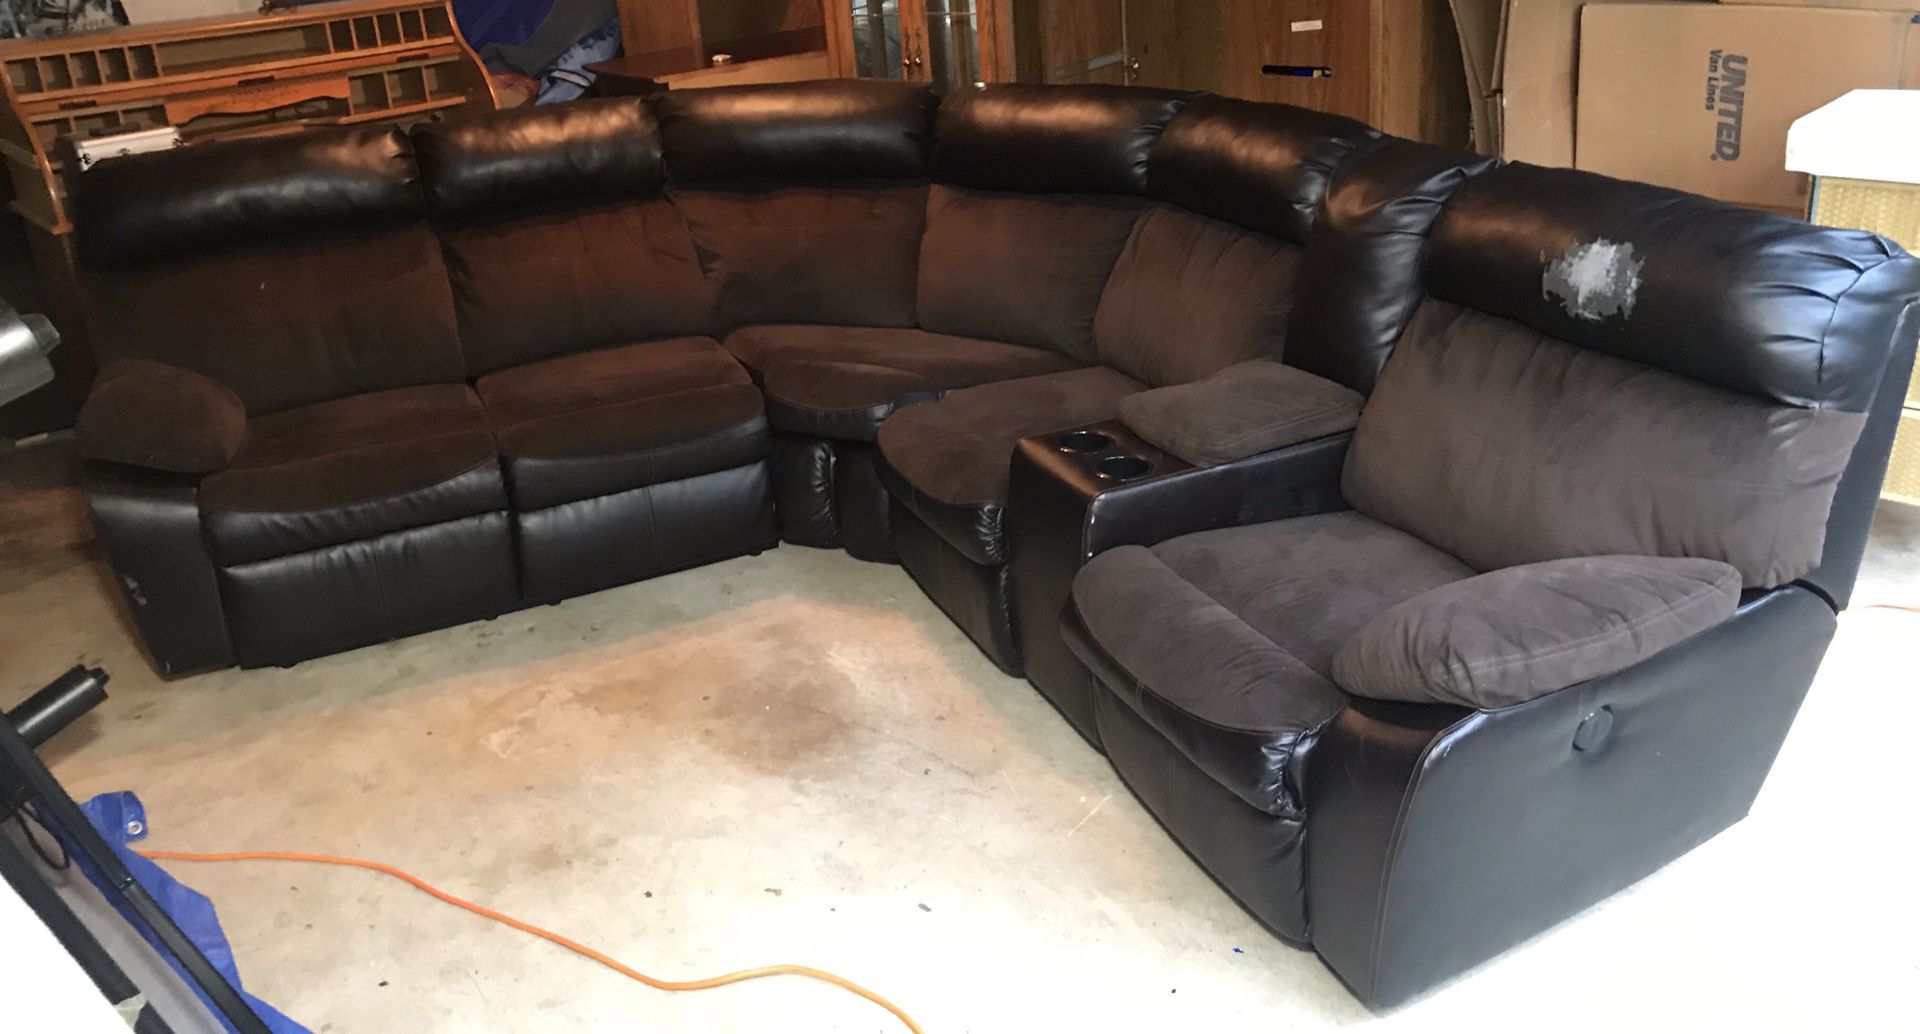 2 Piece Sectional Dual Power Recline Two Tone Pleather & Fabric Couch w/ Cup Holders & Storage Sofa